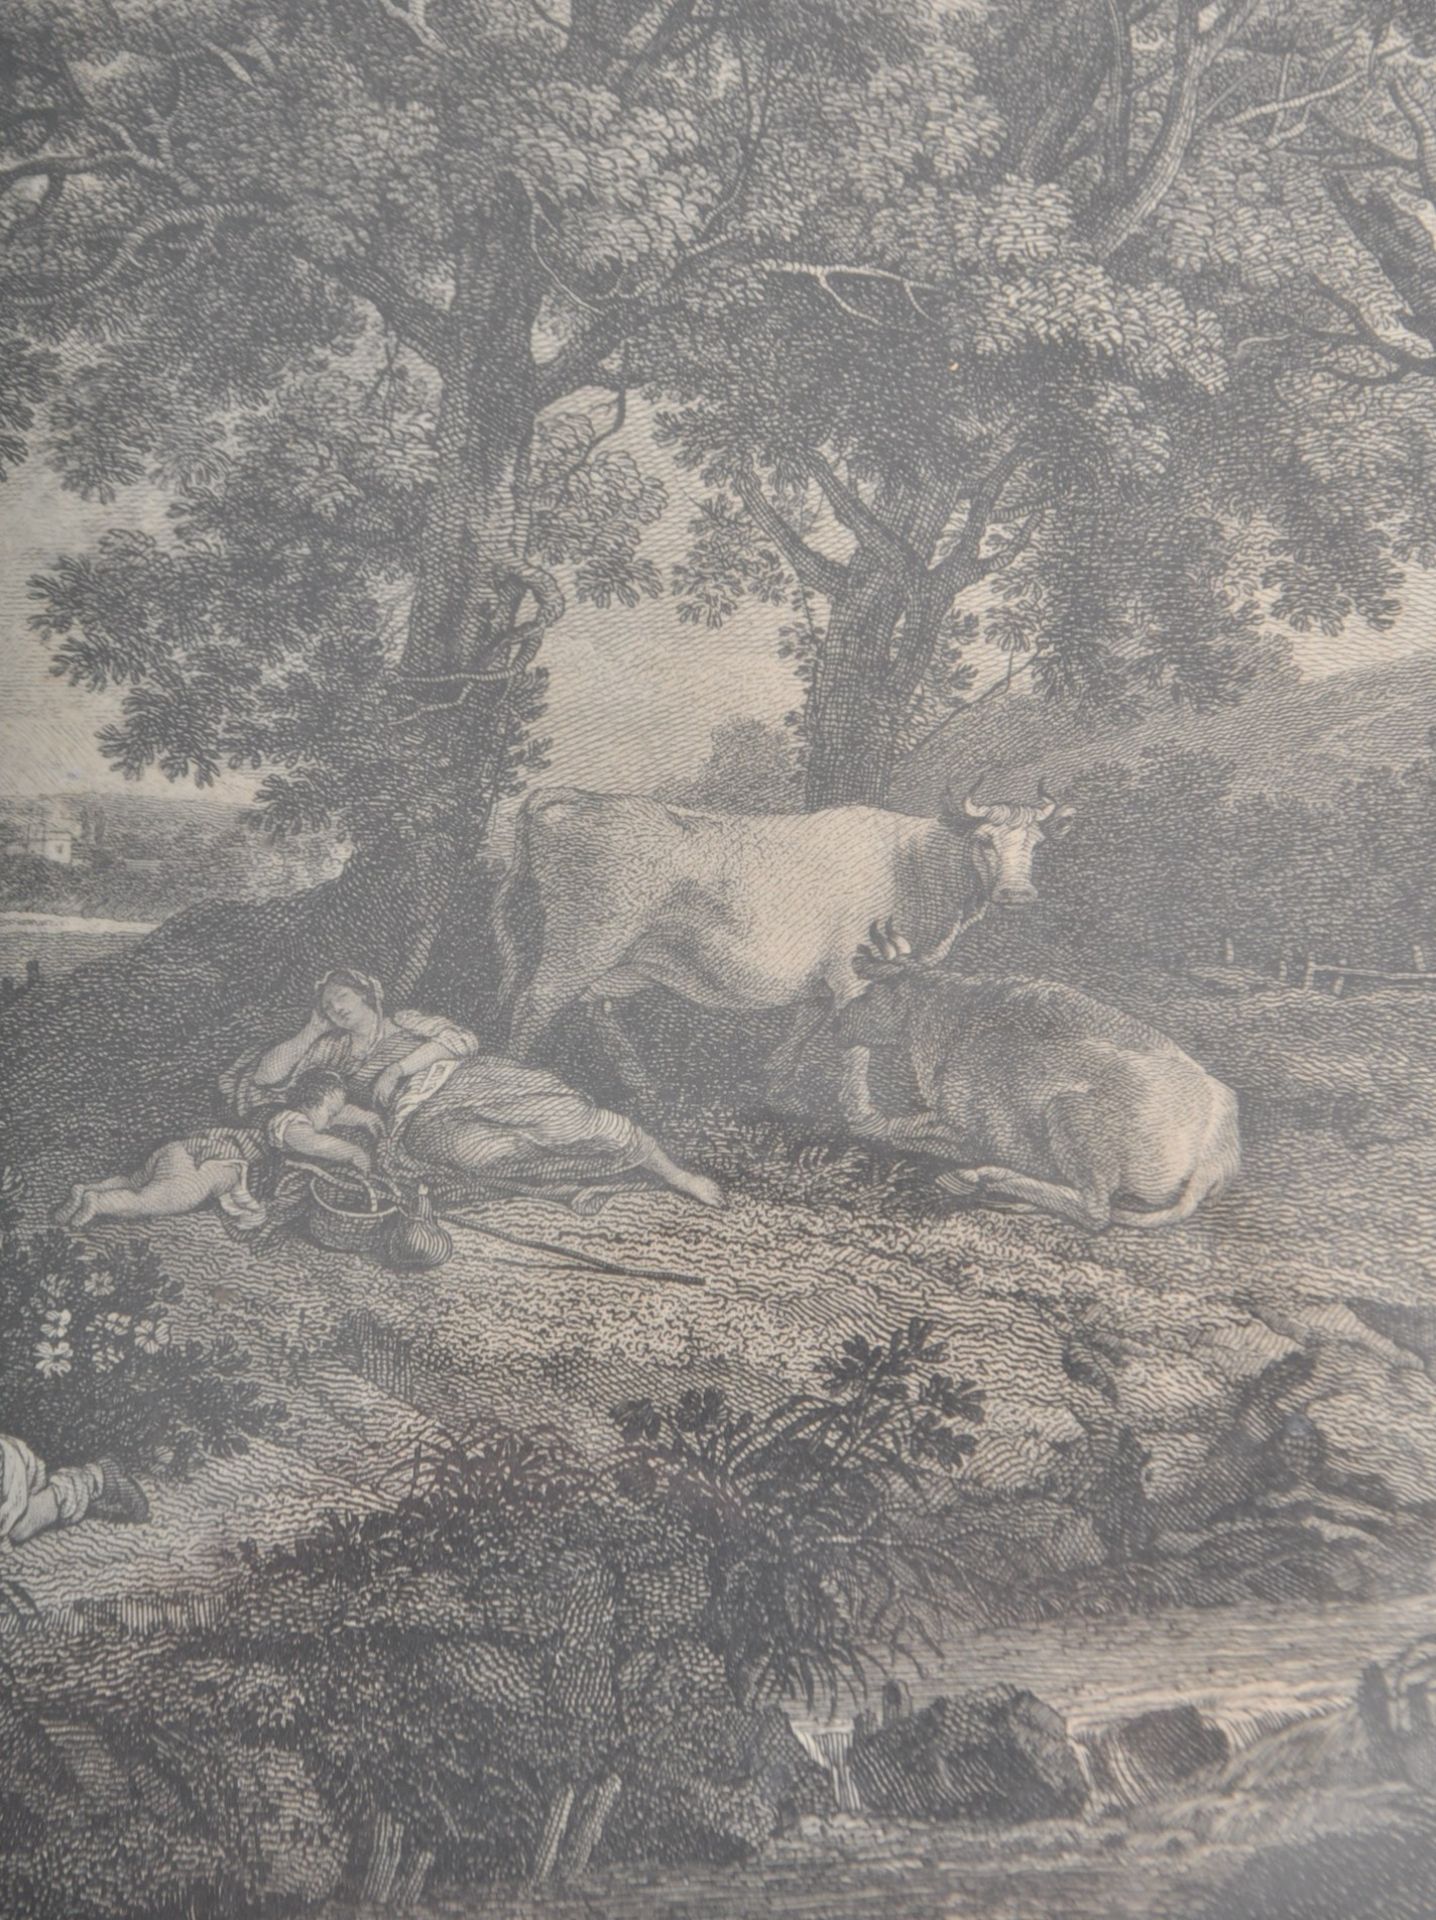 LATE VICTORIAN ENGRAVING OF COUNTRYSIDE SCENE - Image 4 of 7